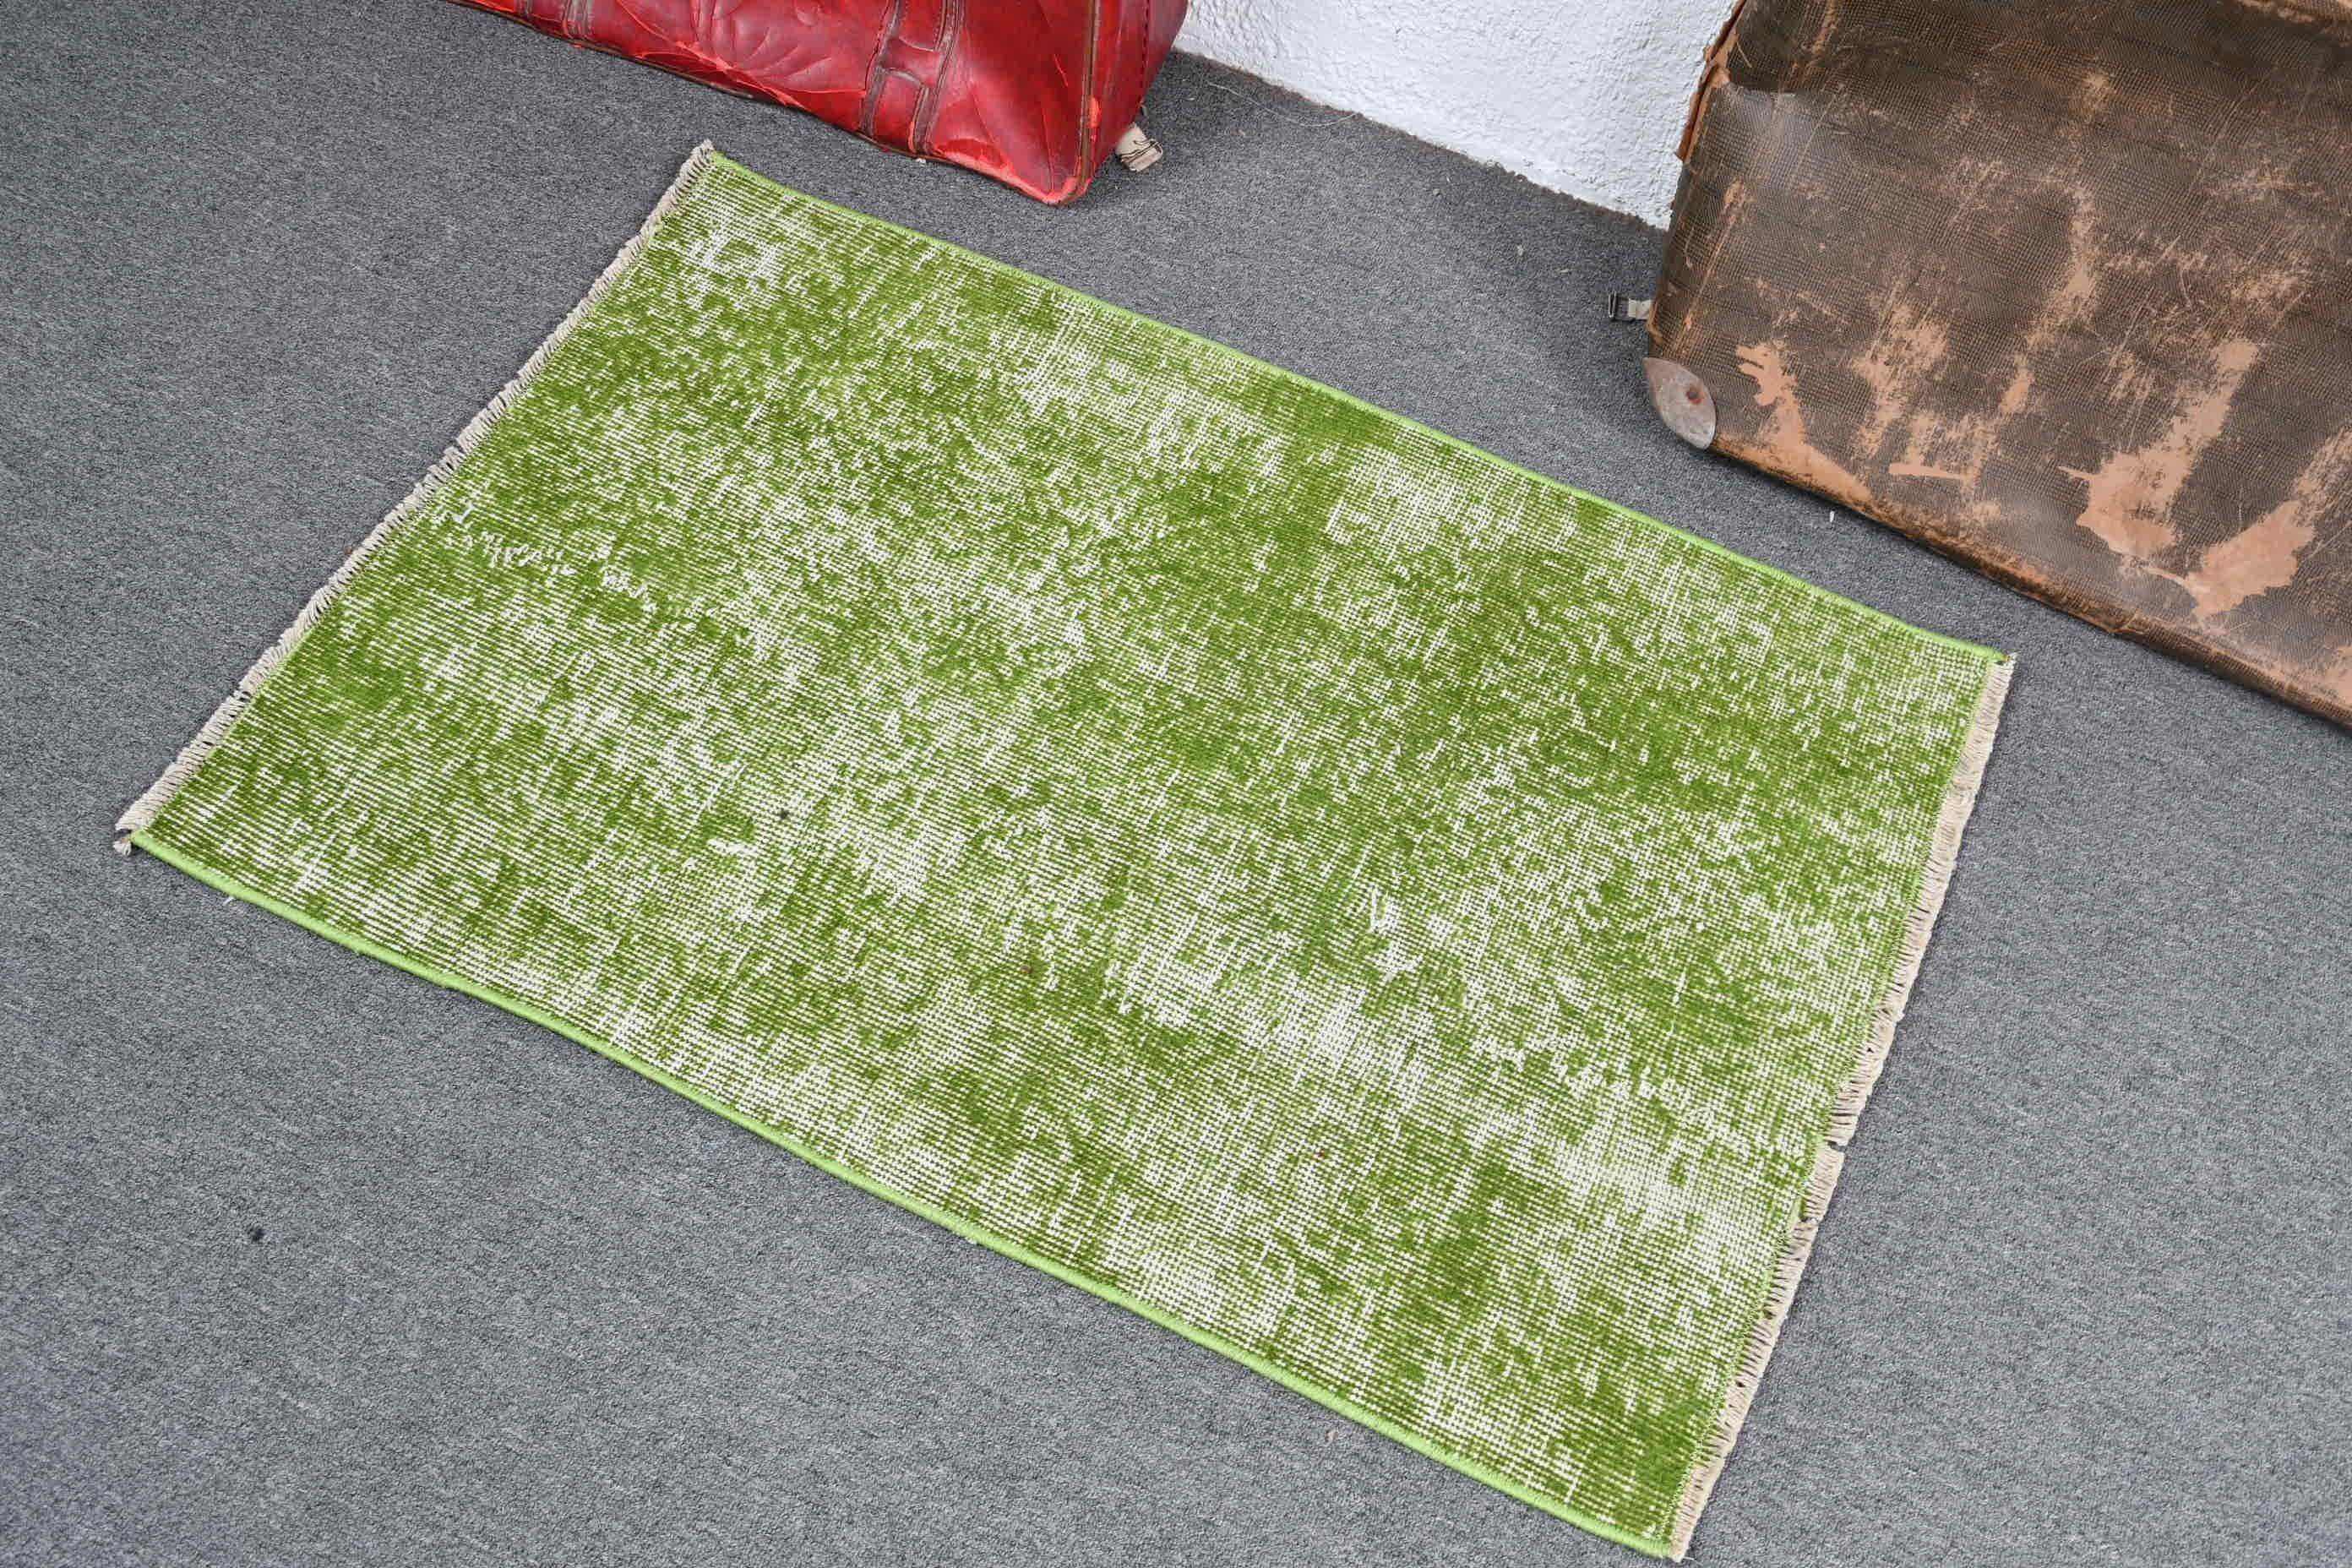 Turkish Rug, Bedroom Rugs, Rugs for Kitchen, Wool Rug, Vintage Rugs, Anatolian Rug, Green  2.3x3.3 ft Small Rugs, Car Mat Rug